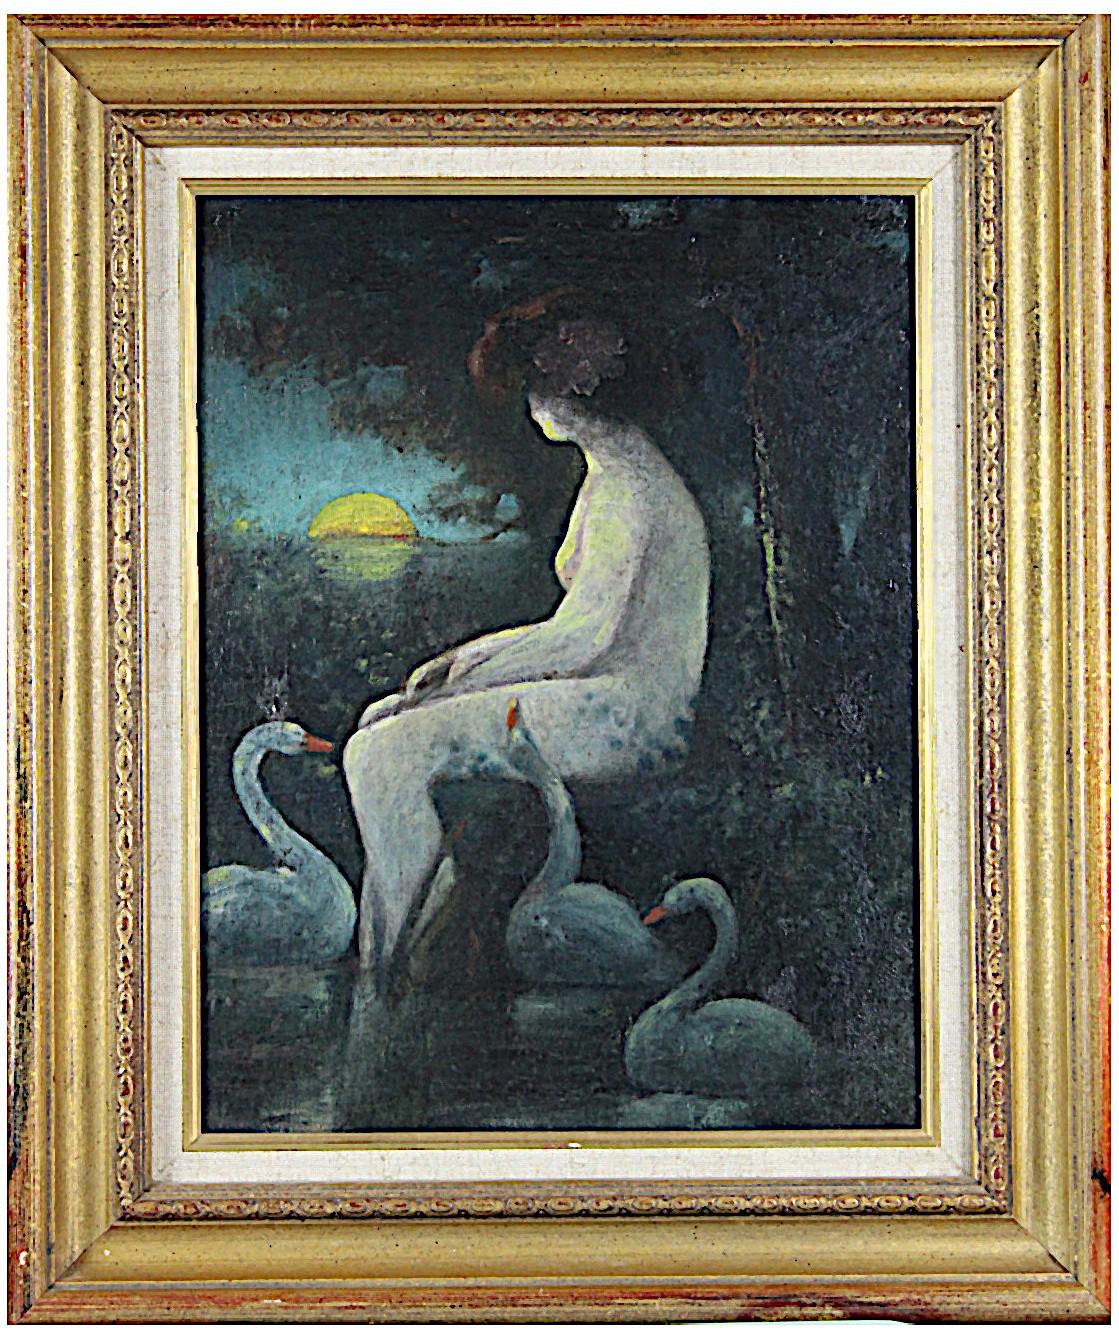 Unknown Nude Painting - Woman Bathing at Moonlight, Original Oil on Canvas, French Romantic School